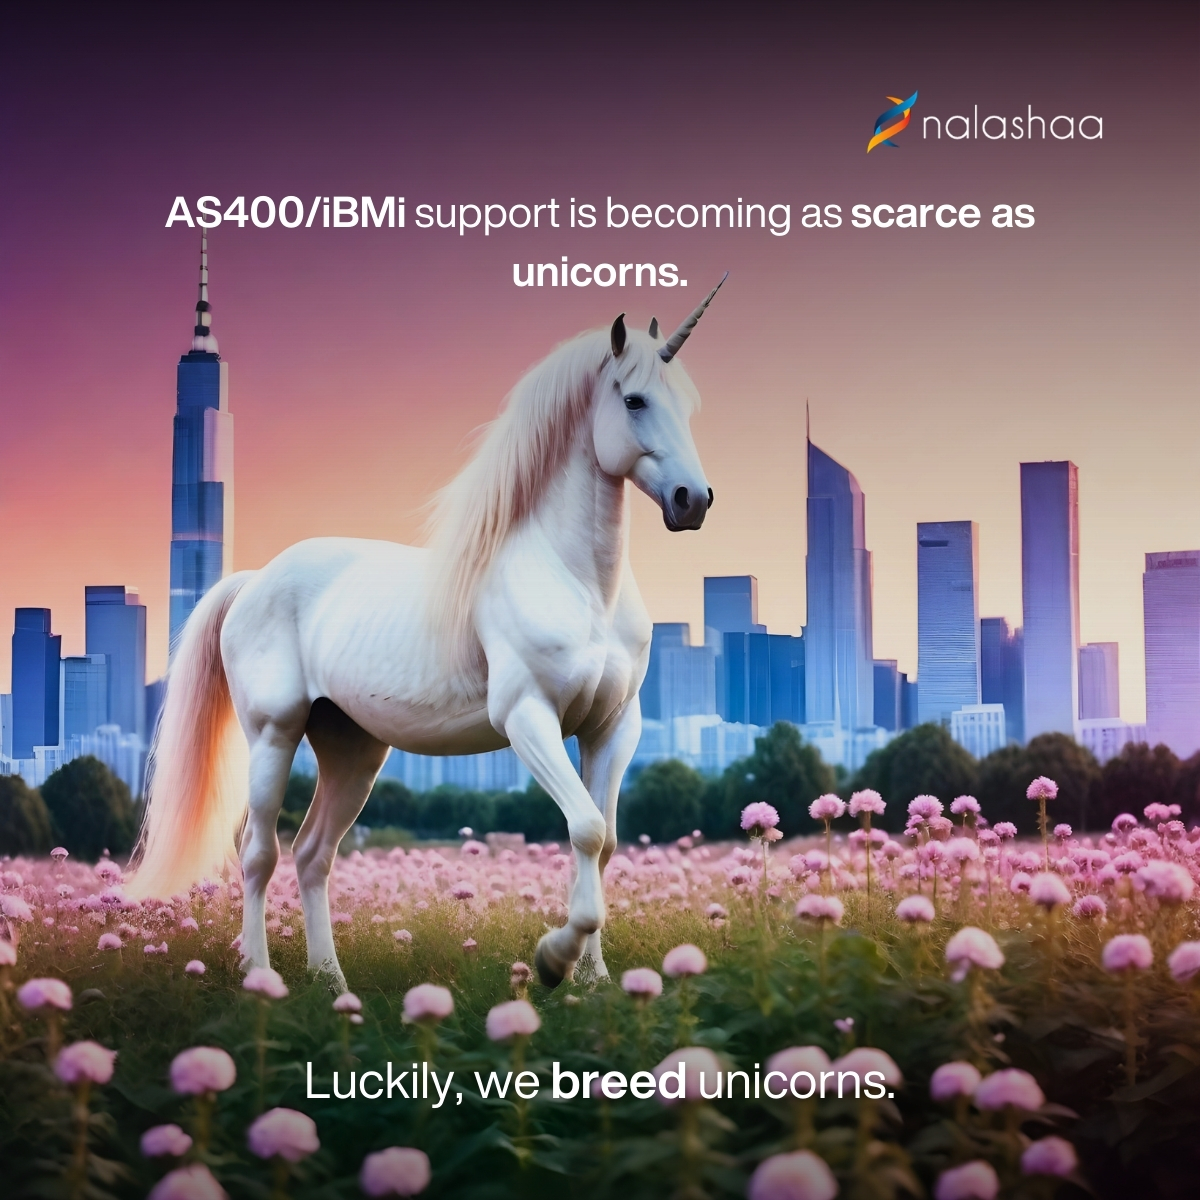 Unicorn-level support for AS400/iBMi. Rare, reliable, revolutionary. 

#UnicornSupport #AS400 #IBMiSeries #ExpertSupport #Modernization #LegacySystems #IBMi #AOBAS